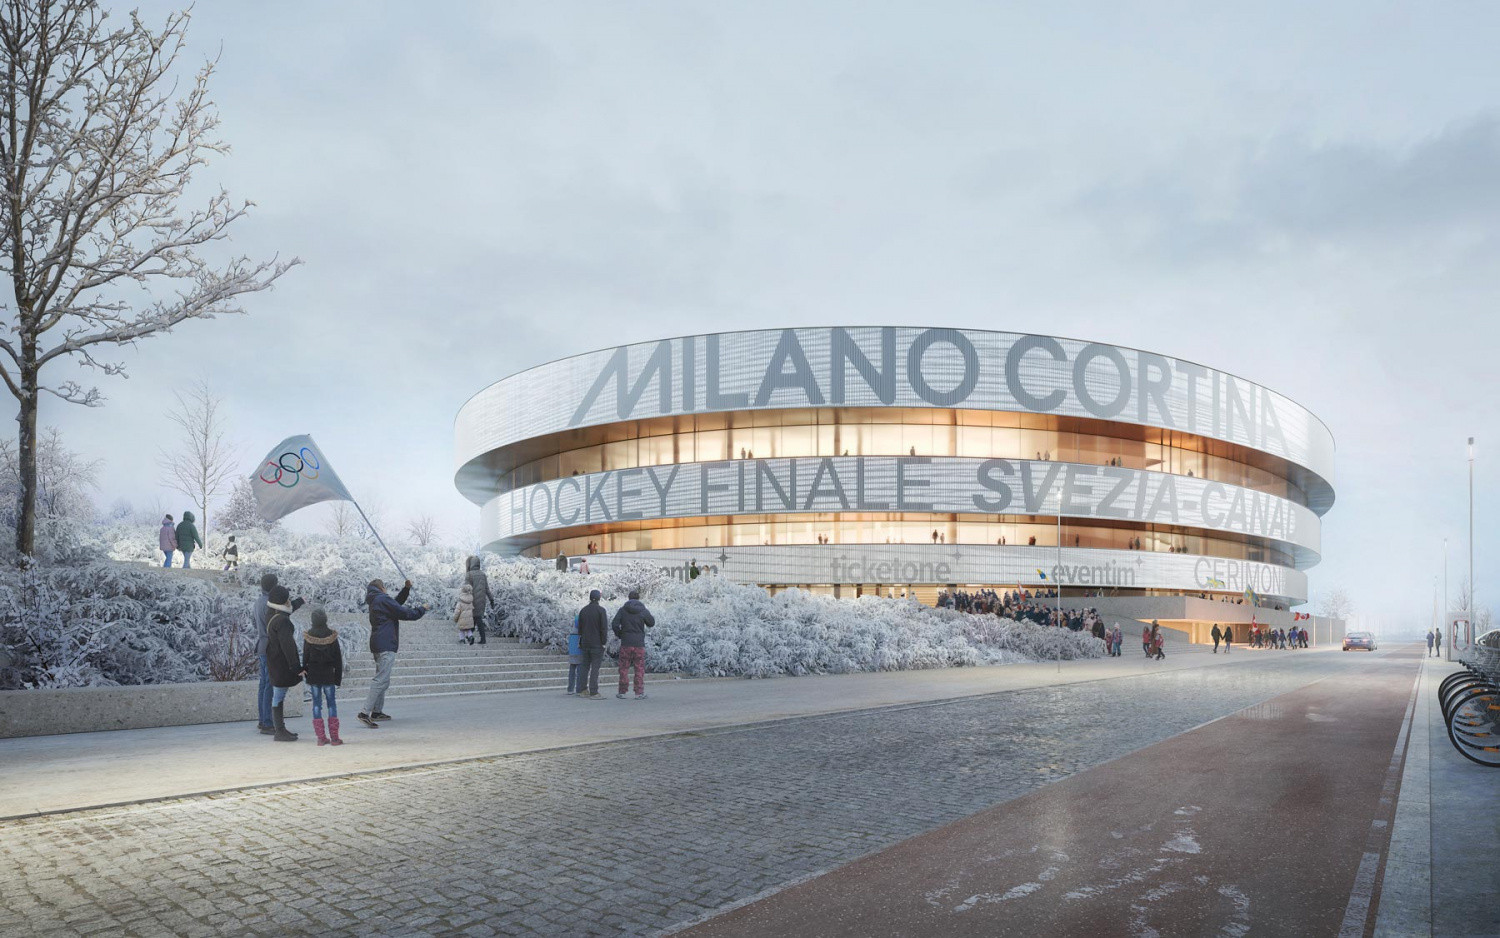 Olympic ice hockey is planned to be played at the Arena Santa Giulia ©Onirism Studio